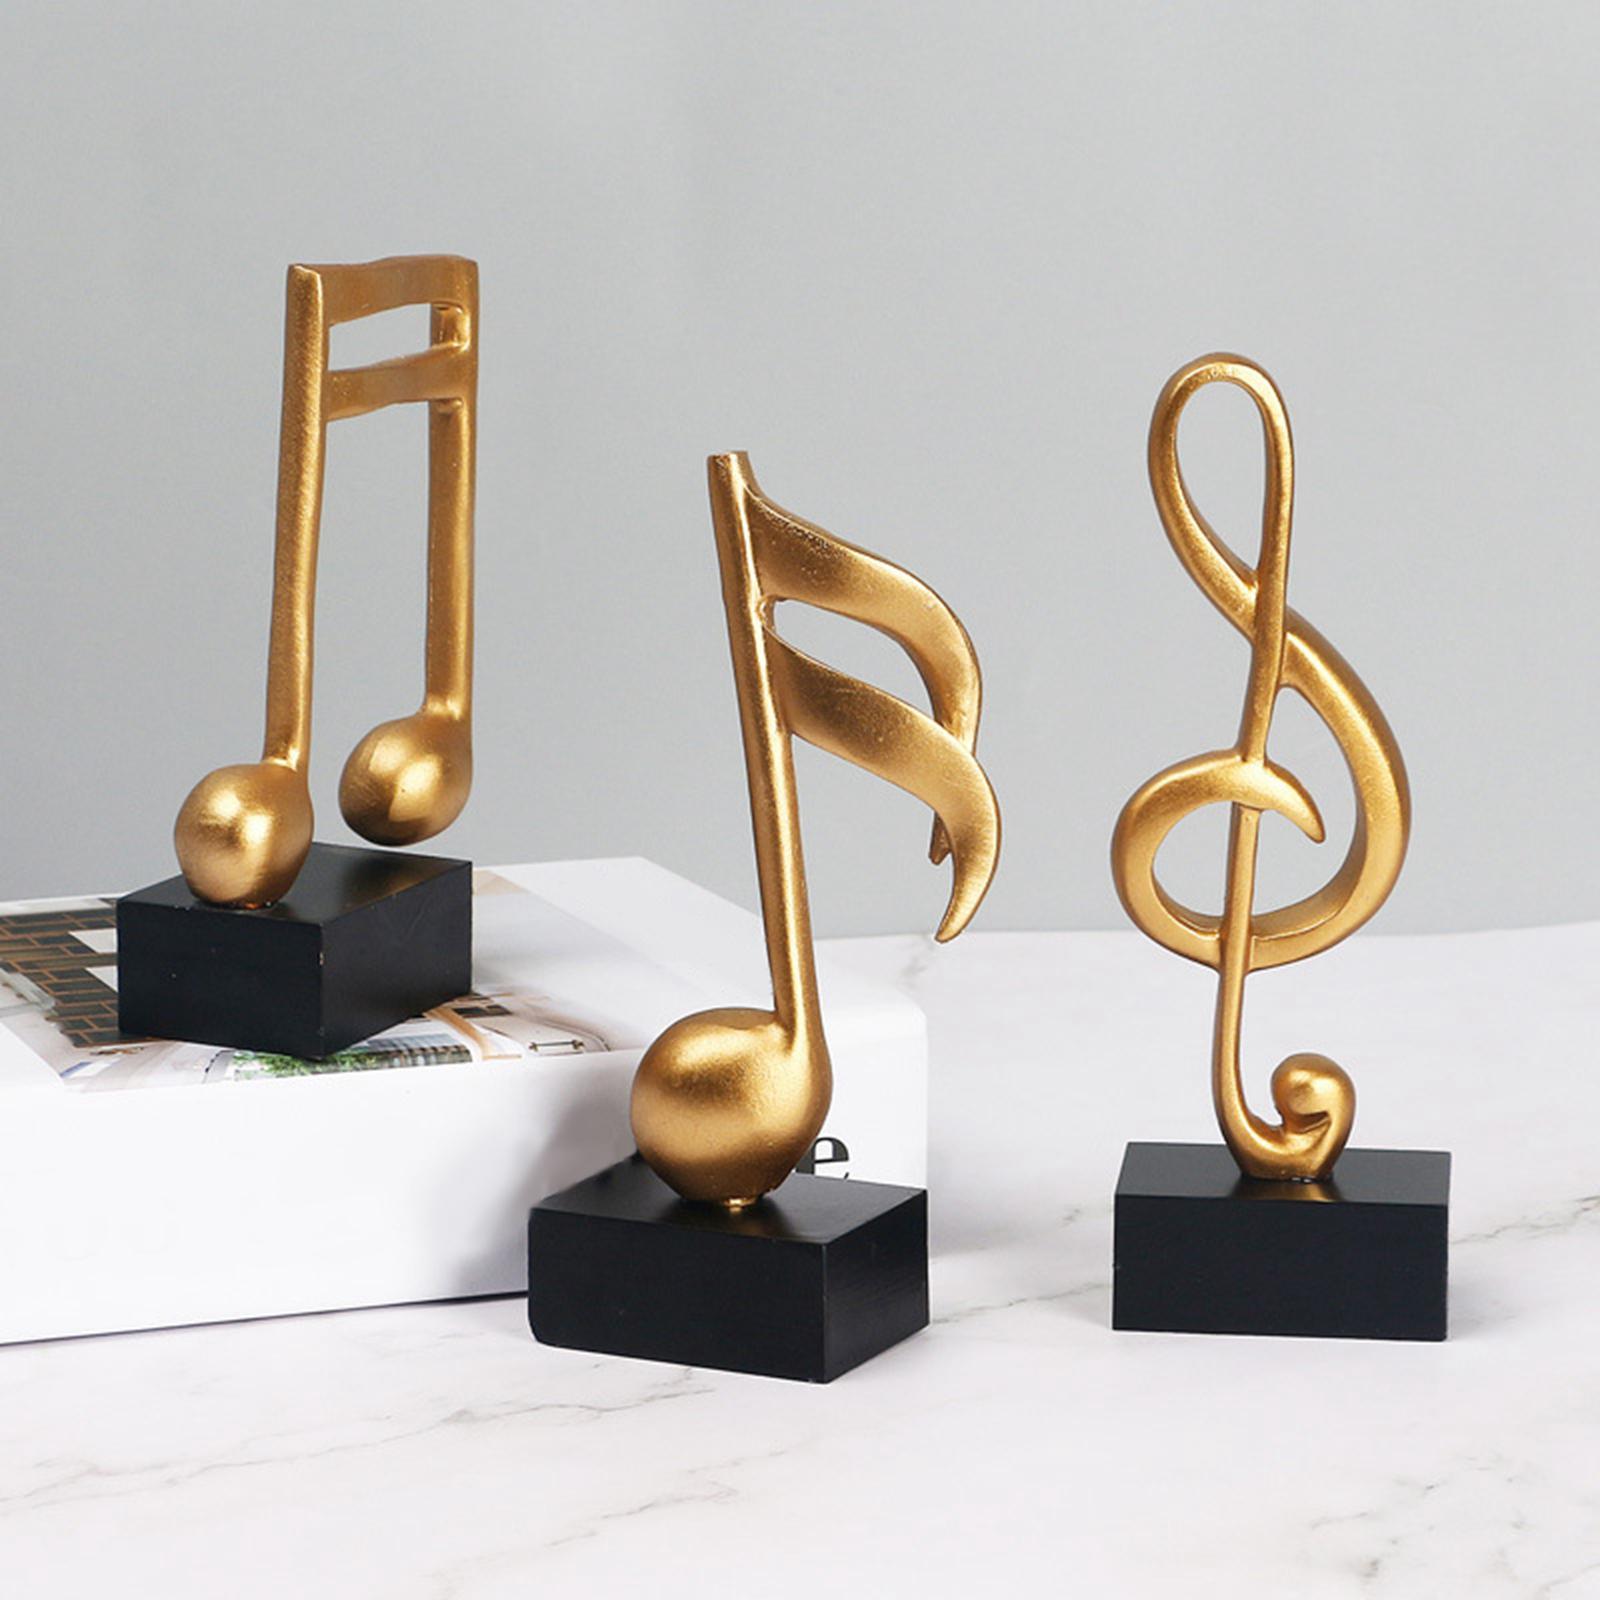 3Pcs Music Note Musical Sculpture Figurine Ornaments for Office Table Decor